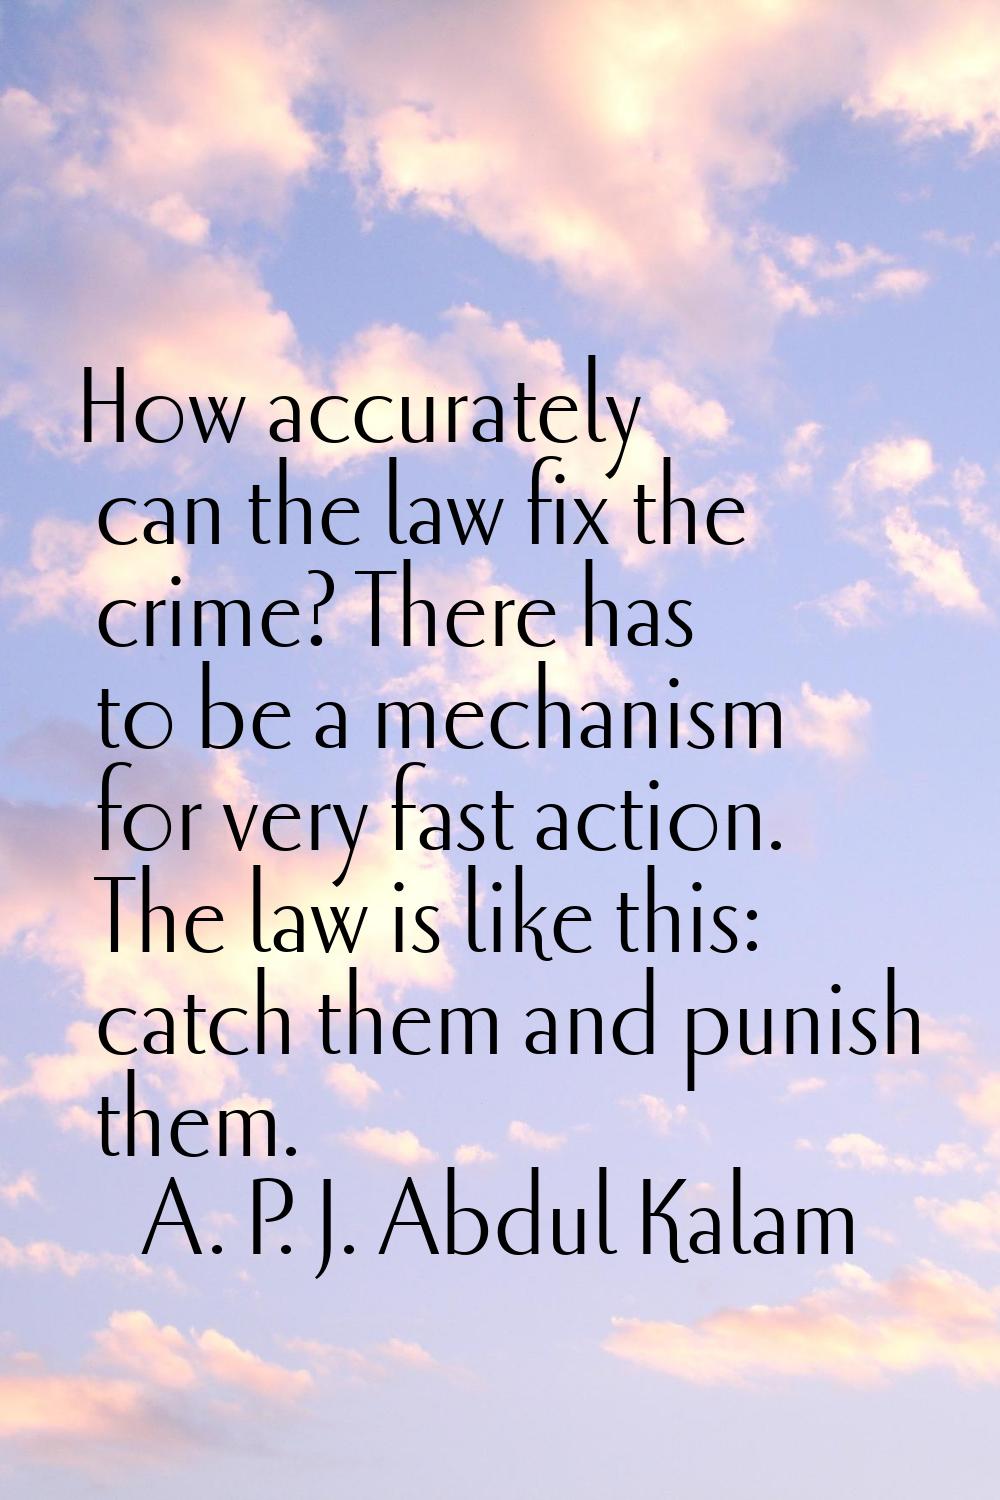 How accurately can the law fix the crime? There has to be a mechanism for very fast action. The law